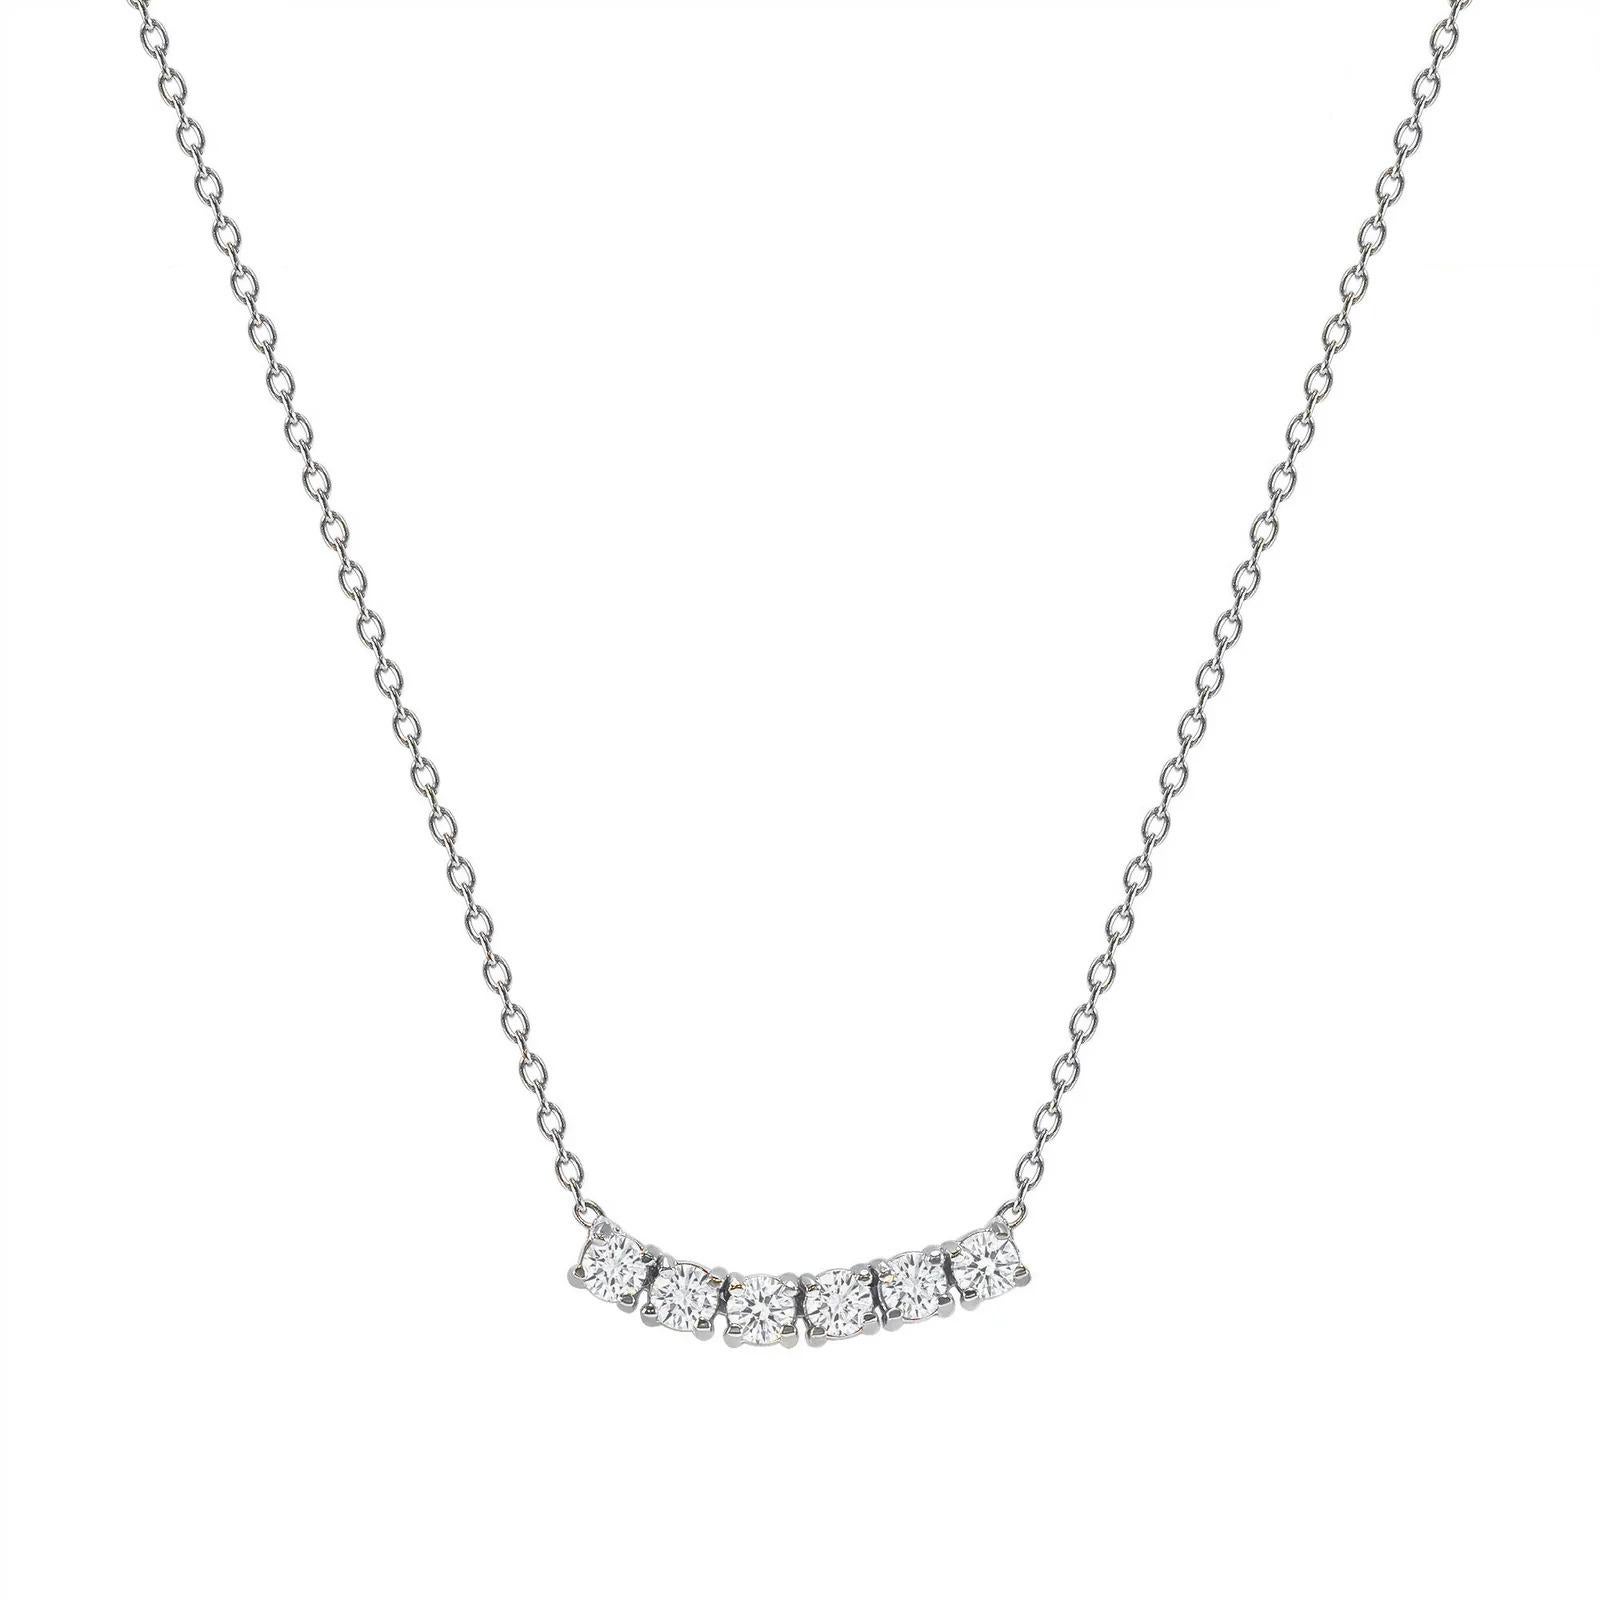 This petite, curved diamond necklace is crafted with gorgeous 14k gold set with six round diamonds.  

Gold: 14k 
Diamond Total Carats: 0.75ct
Diamond Cut: Round (6 diamonds)
Diamond Clarity: VS
Diamond Color: F
Color: White Gold
Necklace Length: 16